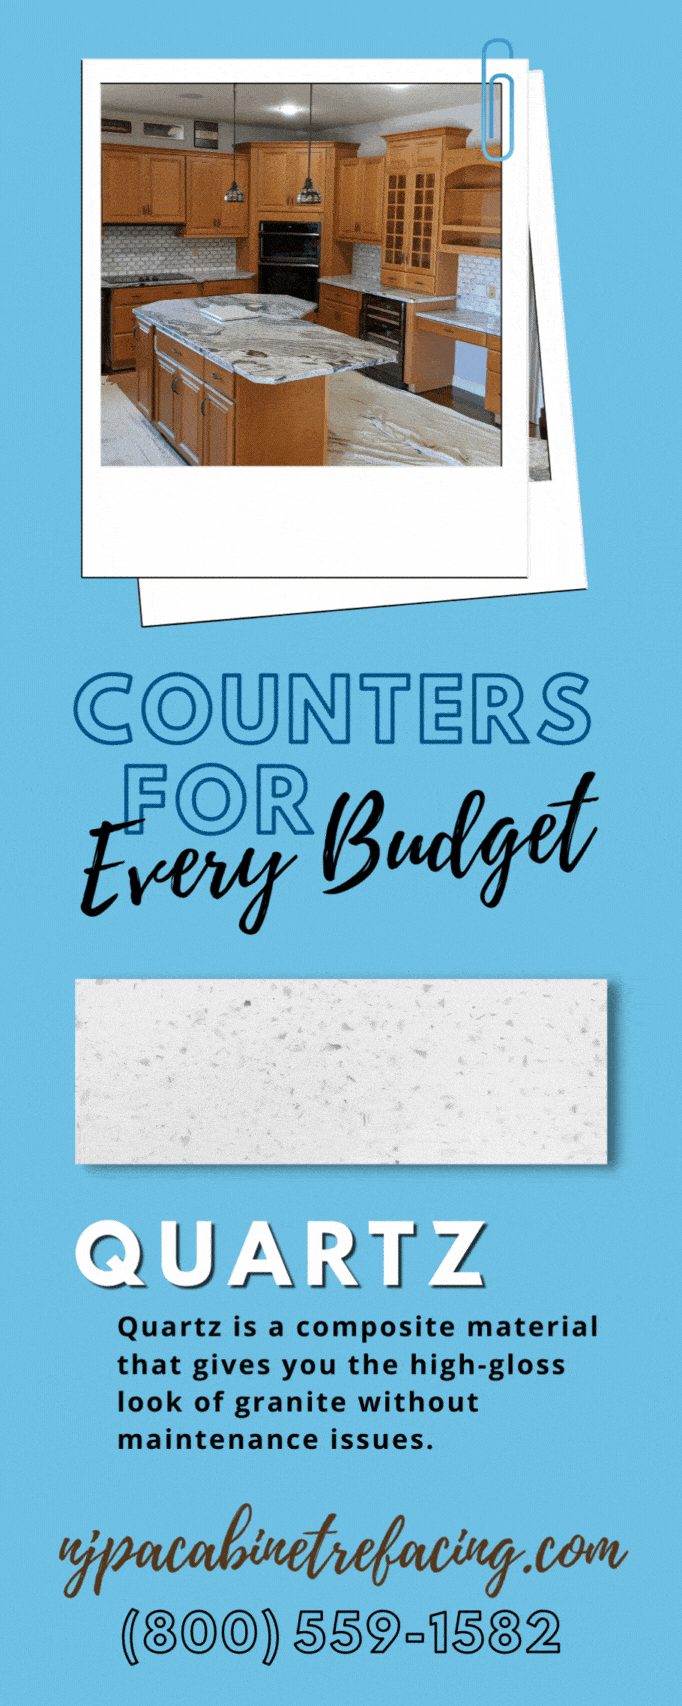 Counters for Every Budget! 3